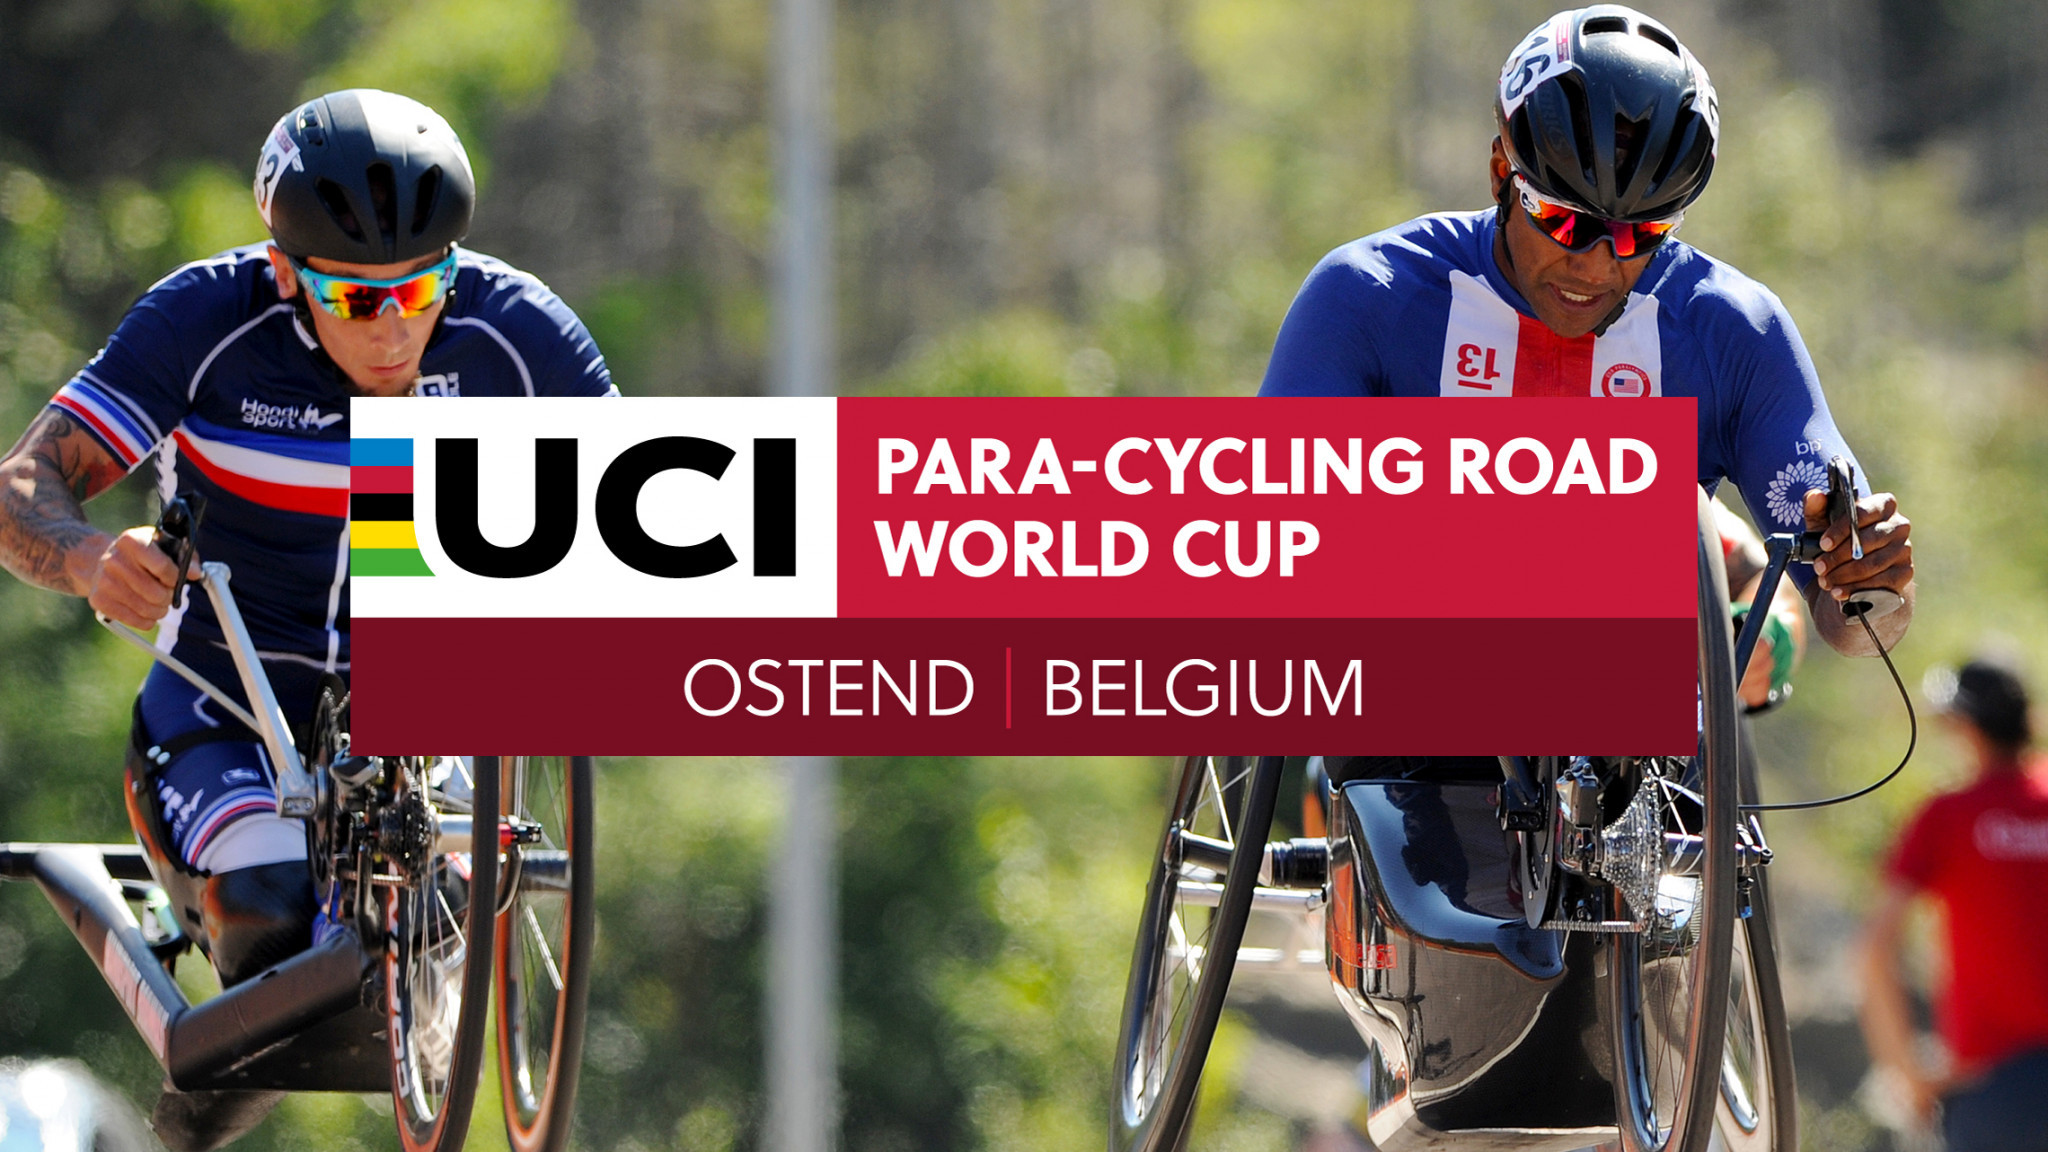 Ostend is set to host the first Para-cycling World Cup since the pandemic hit ©UCI